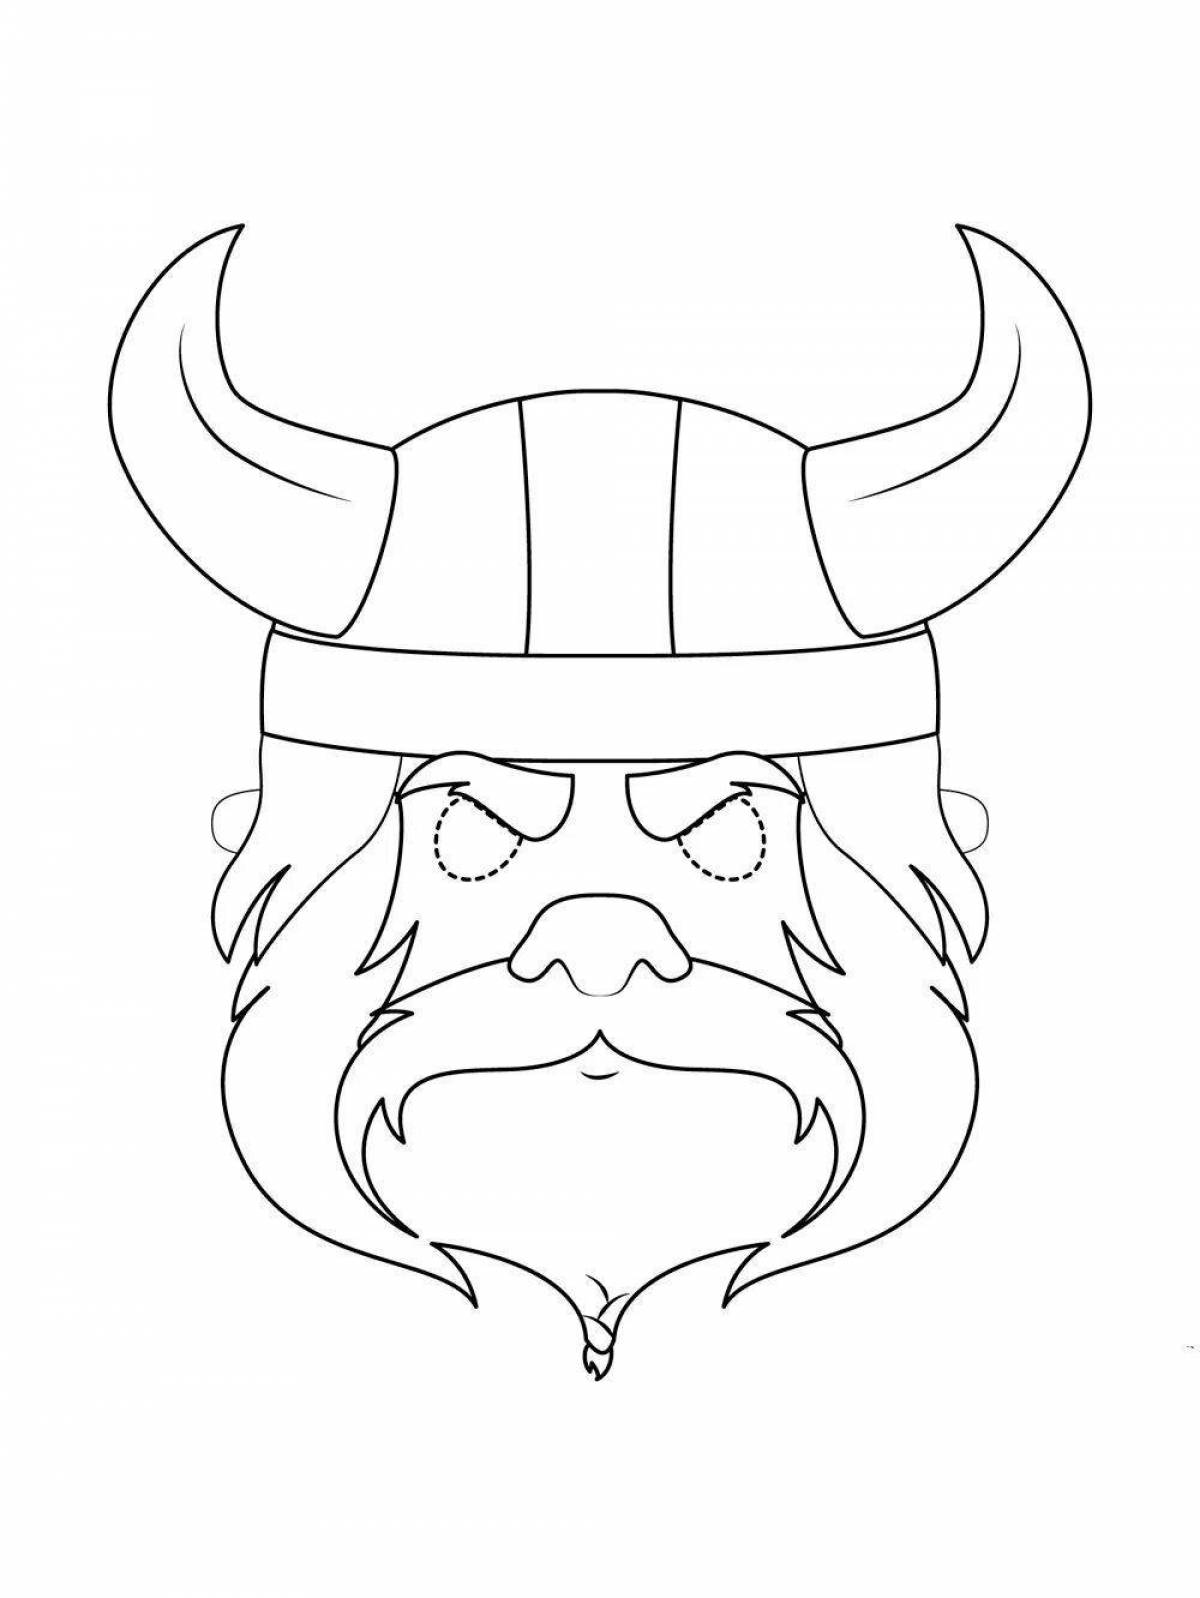 Coloring majestic Viking faces